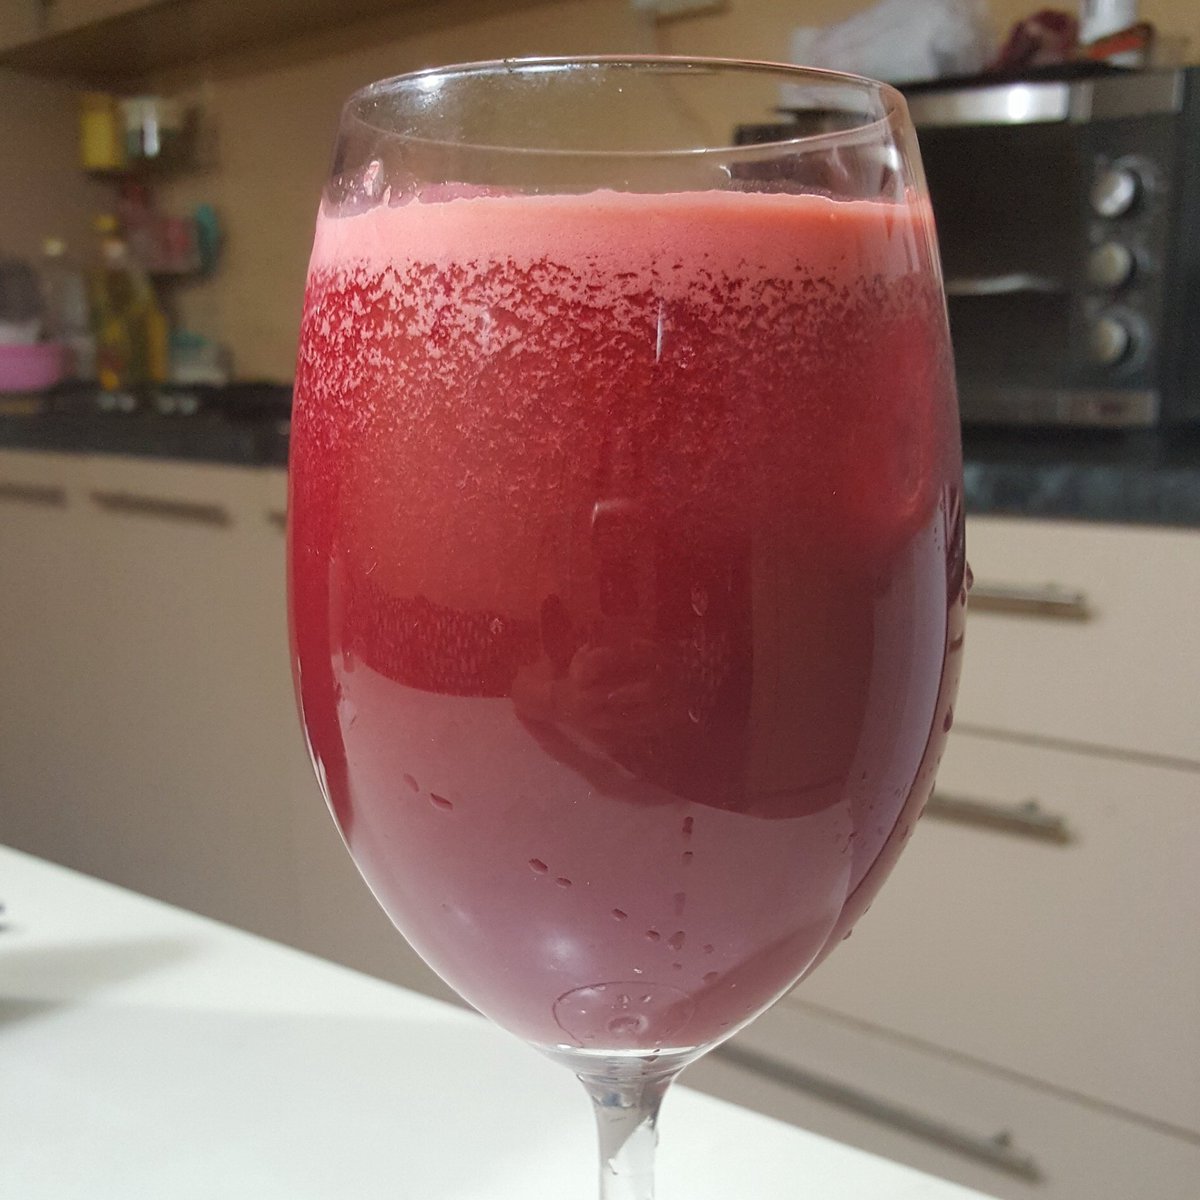 I ate so much during my short getaway … now it’s back to juicing! For dinner; Japanese pear, carrot, celery, pineapple and beetroot. #juicing #juicecleanse #juicefast #juicerecipe #justjuiceit #justkeeponjuicingit #healthyliving #healthylifestyle #healthiswealth #healthyrecipes